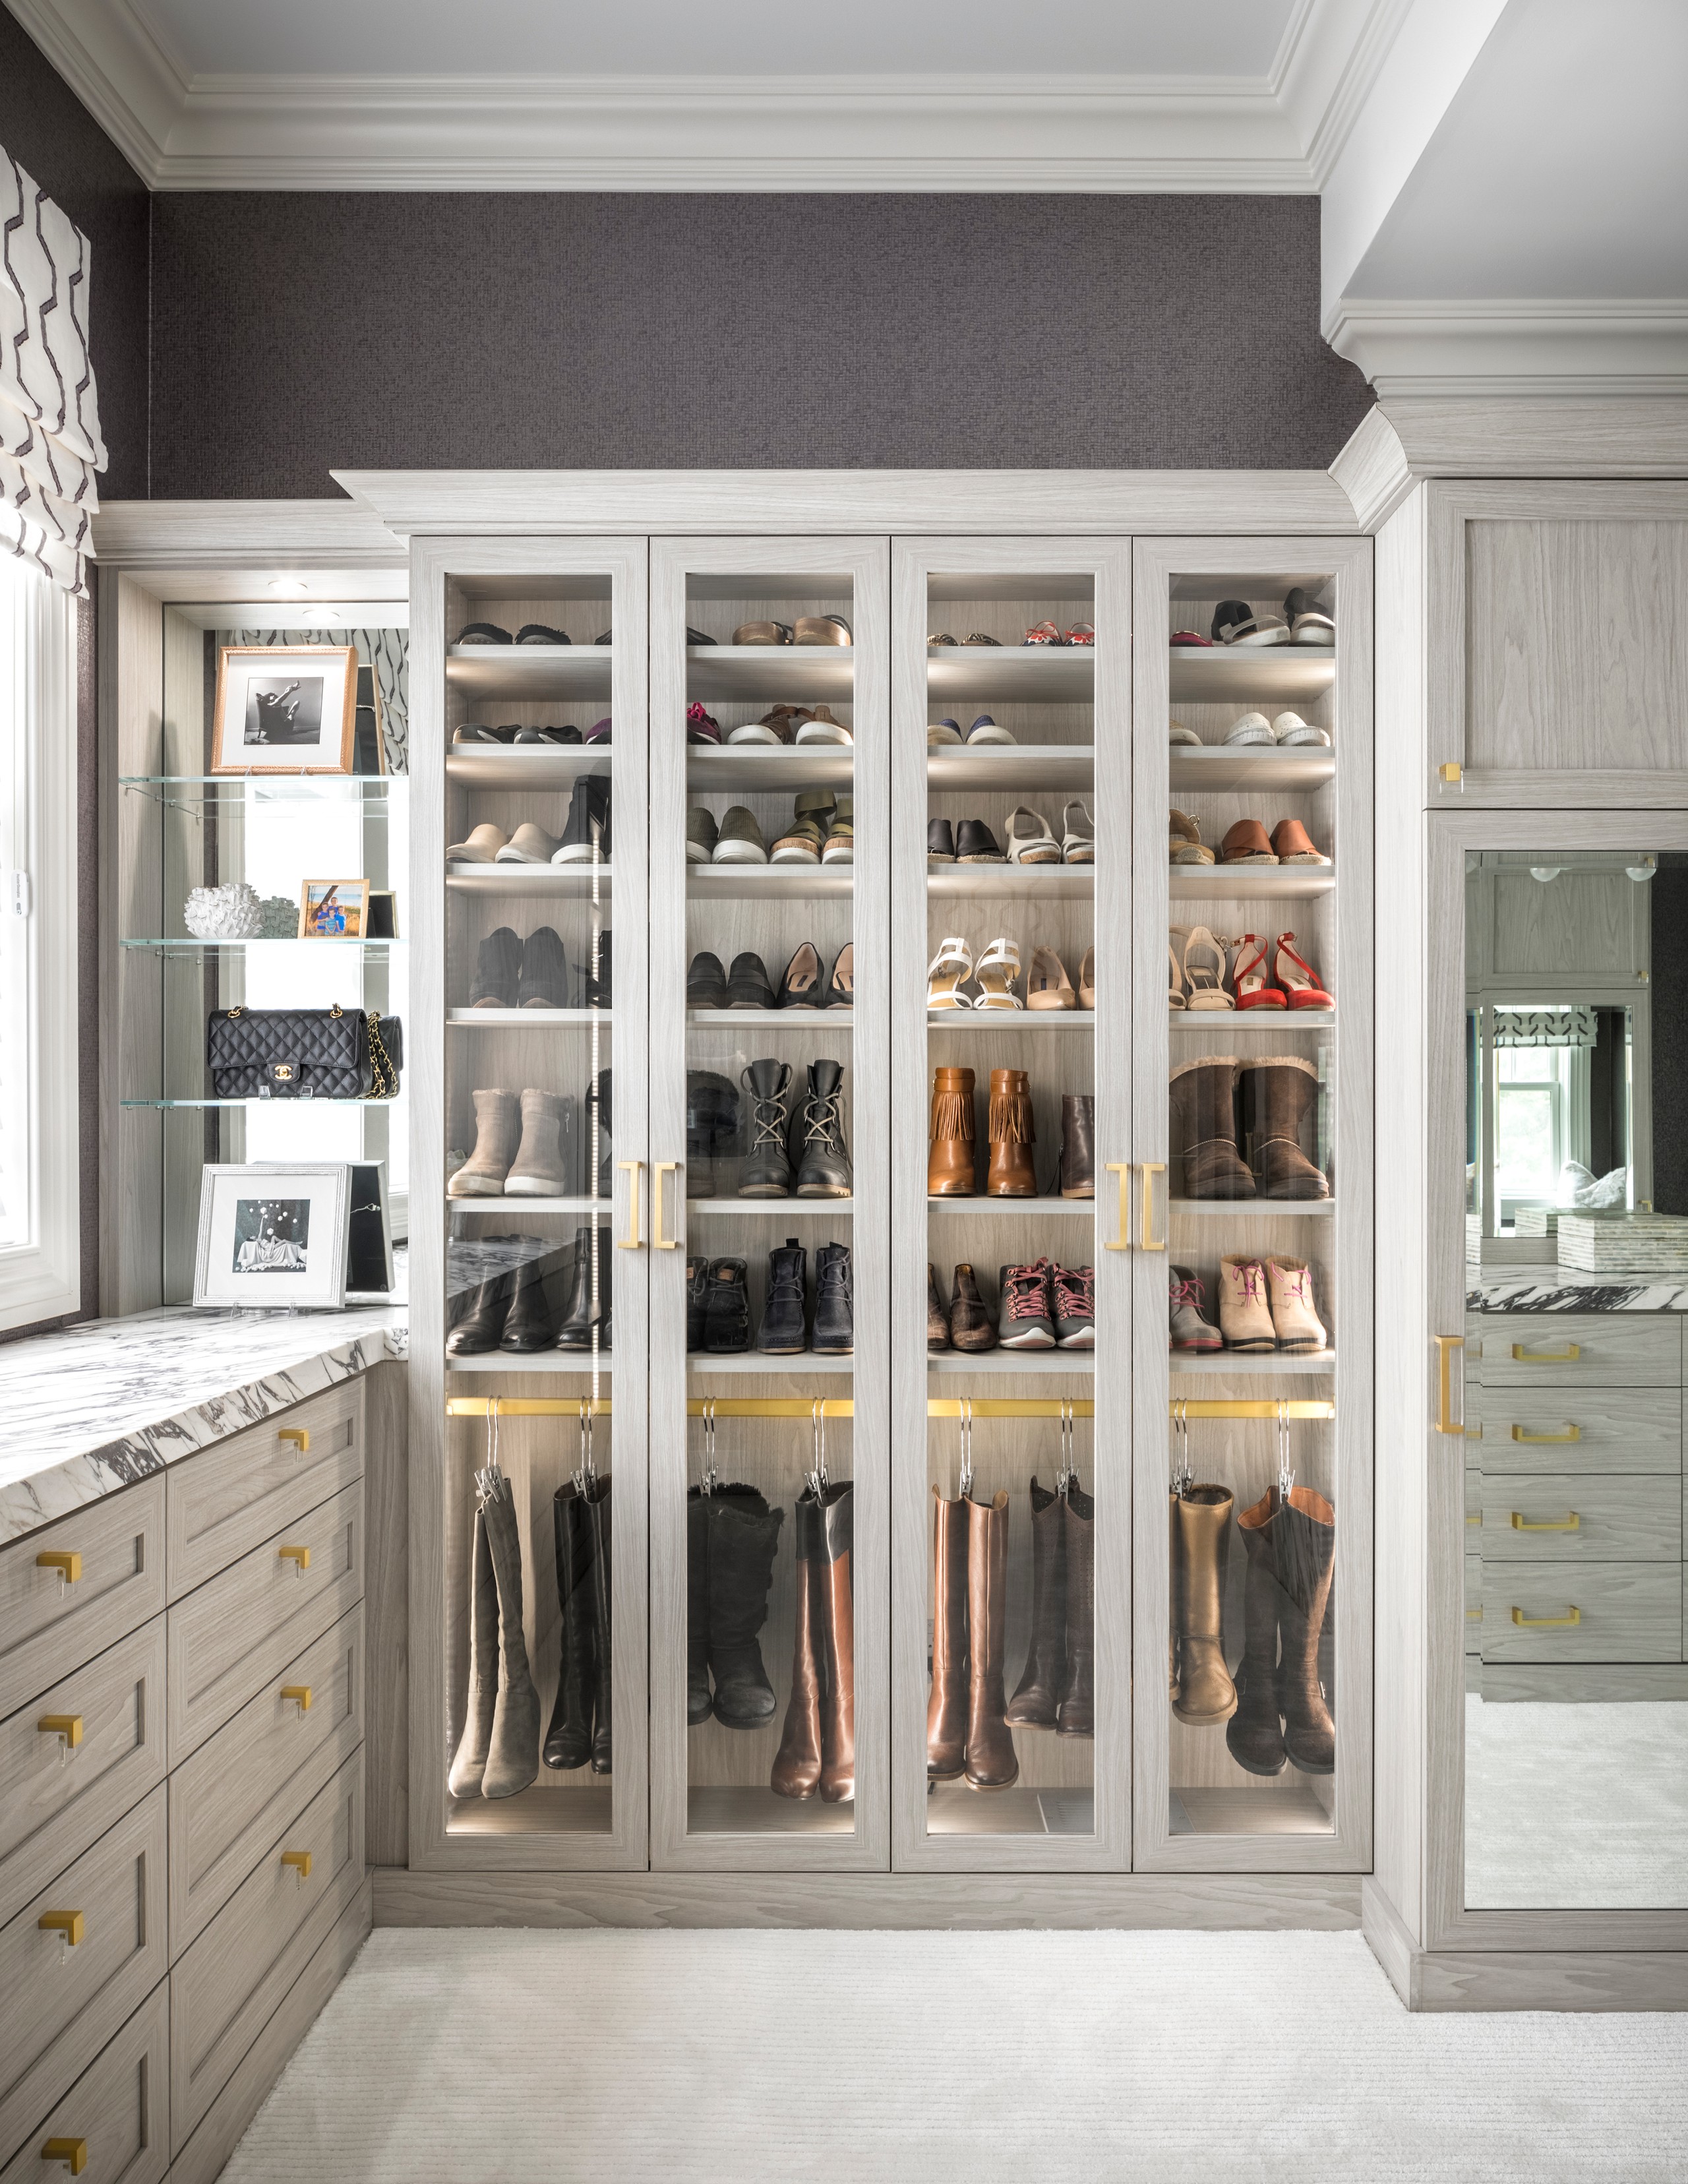 Giant Walk-In Closet - Showplace Cabinetry